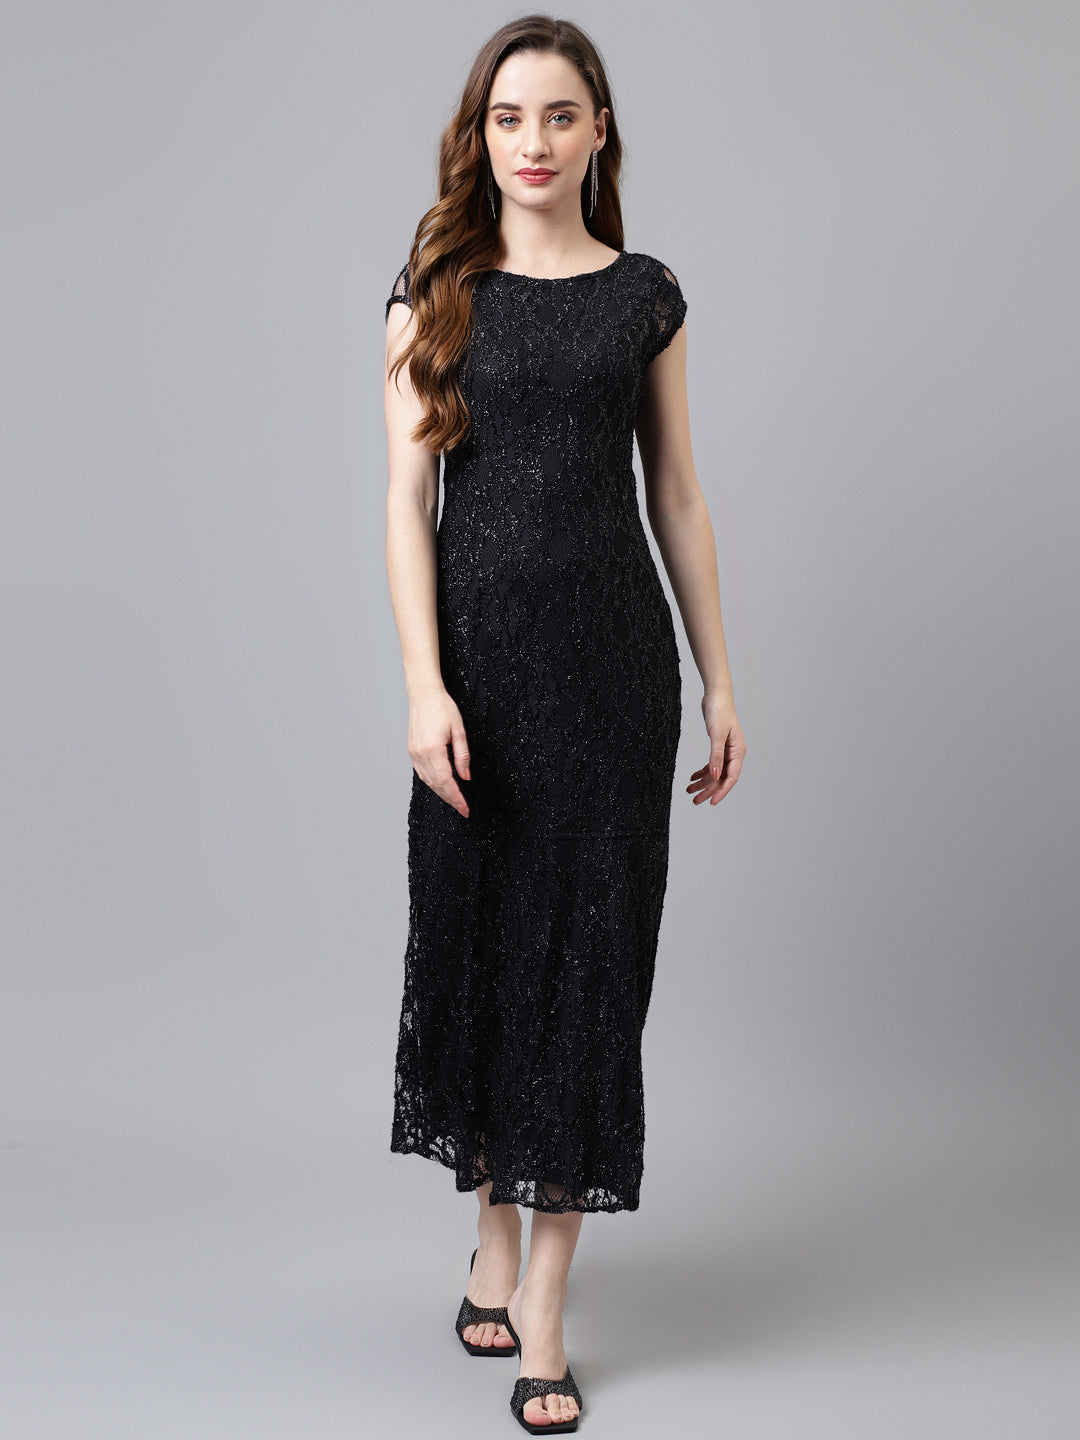 Black Cap Sleeve Round Neck Solid Women Maxi Dress For Party